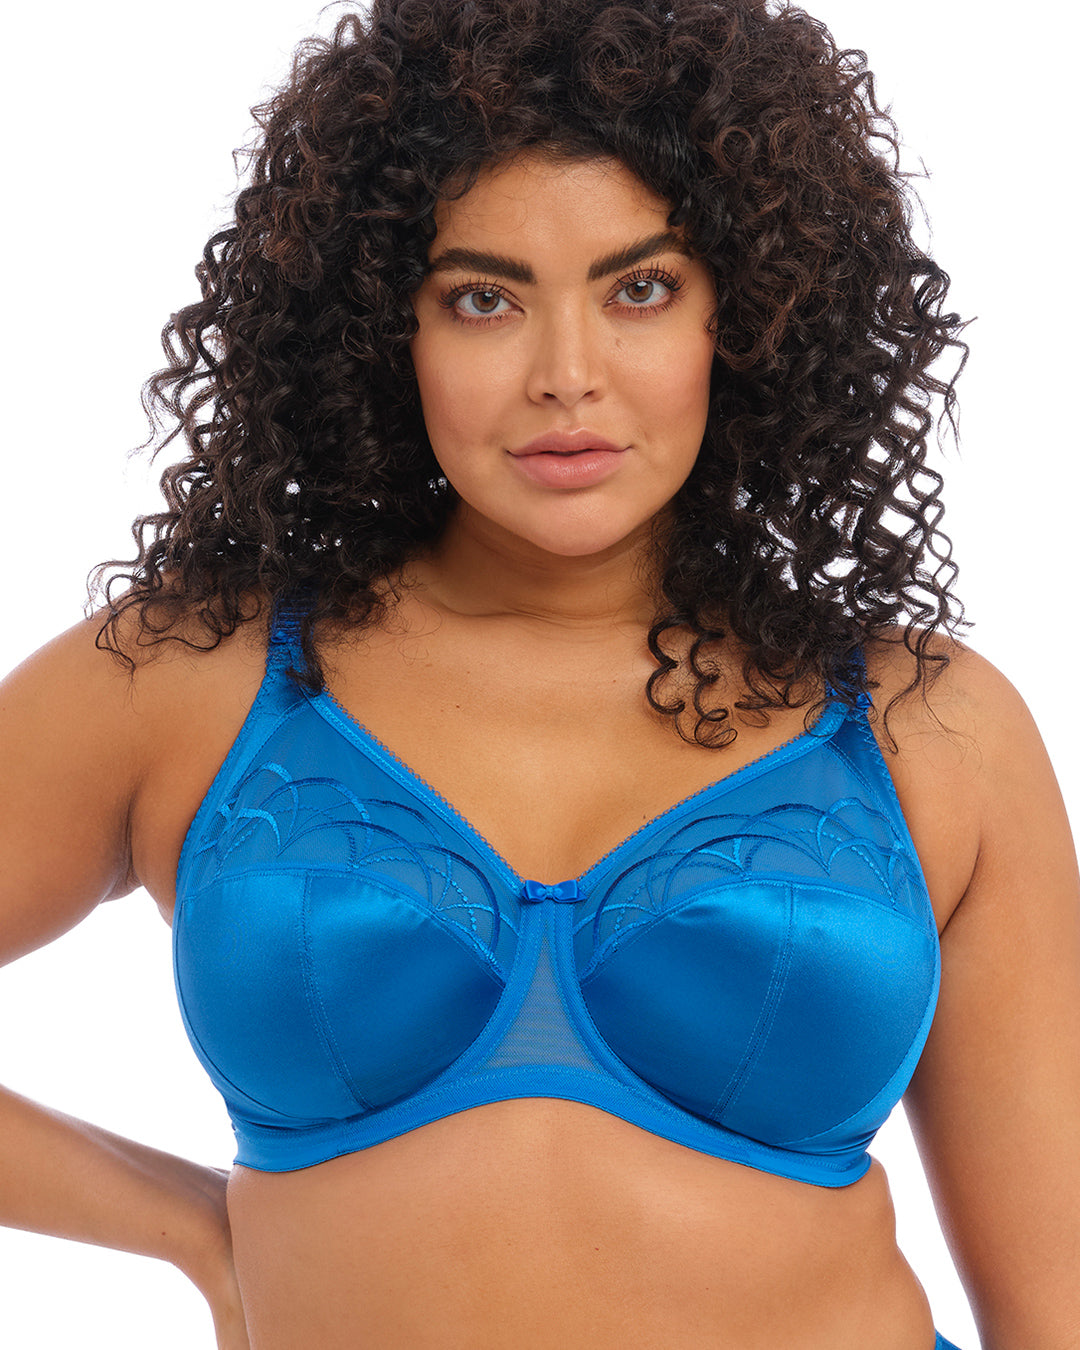 Elomi Cate Underwire Full Cup Banded Bra EL4030 